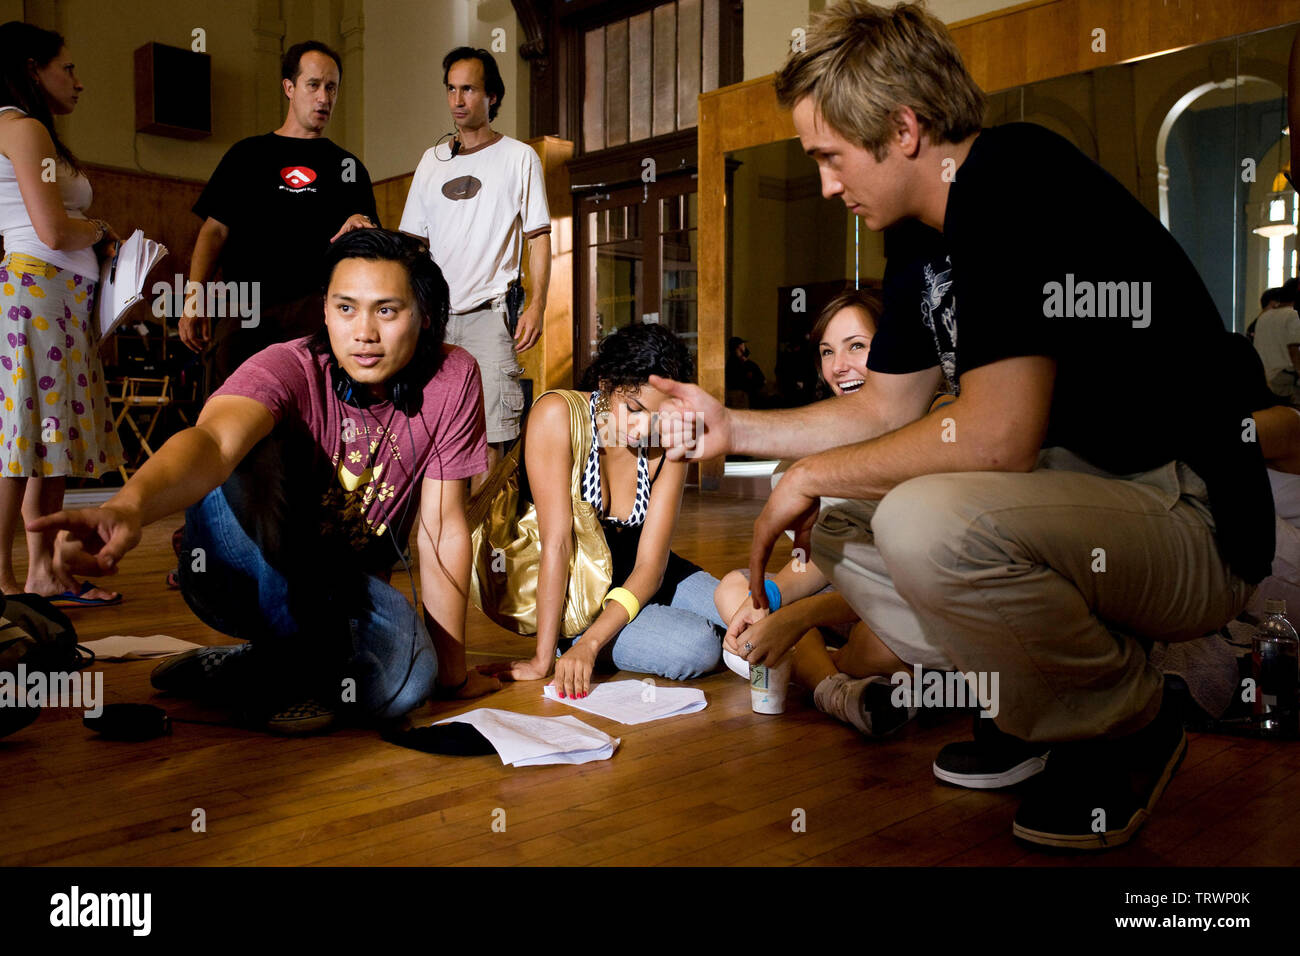 ROBERT HOFFMAN , BRIANA EVIGAN , DANIELLE POLANCO and JON CHU in STEP UP 2: THE STREETS (2008). Copyright: Editorial use only. No merchandising or book covers. This is a publicly distributed handout. Access rights only, no license of copyright provided. Only to be reproduced in conjunction with promotion of this film. Credit: OFFSPRING ENTERTAINMENT/SUMMIT ENTERTAINMENT/TOUCHSTONE PICT / BALLARD, KAREN / Album Stock Photo